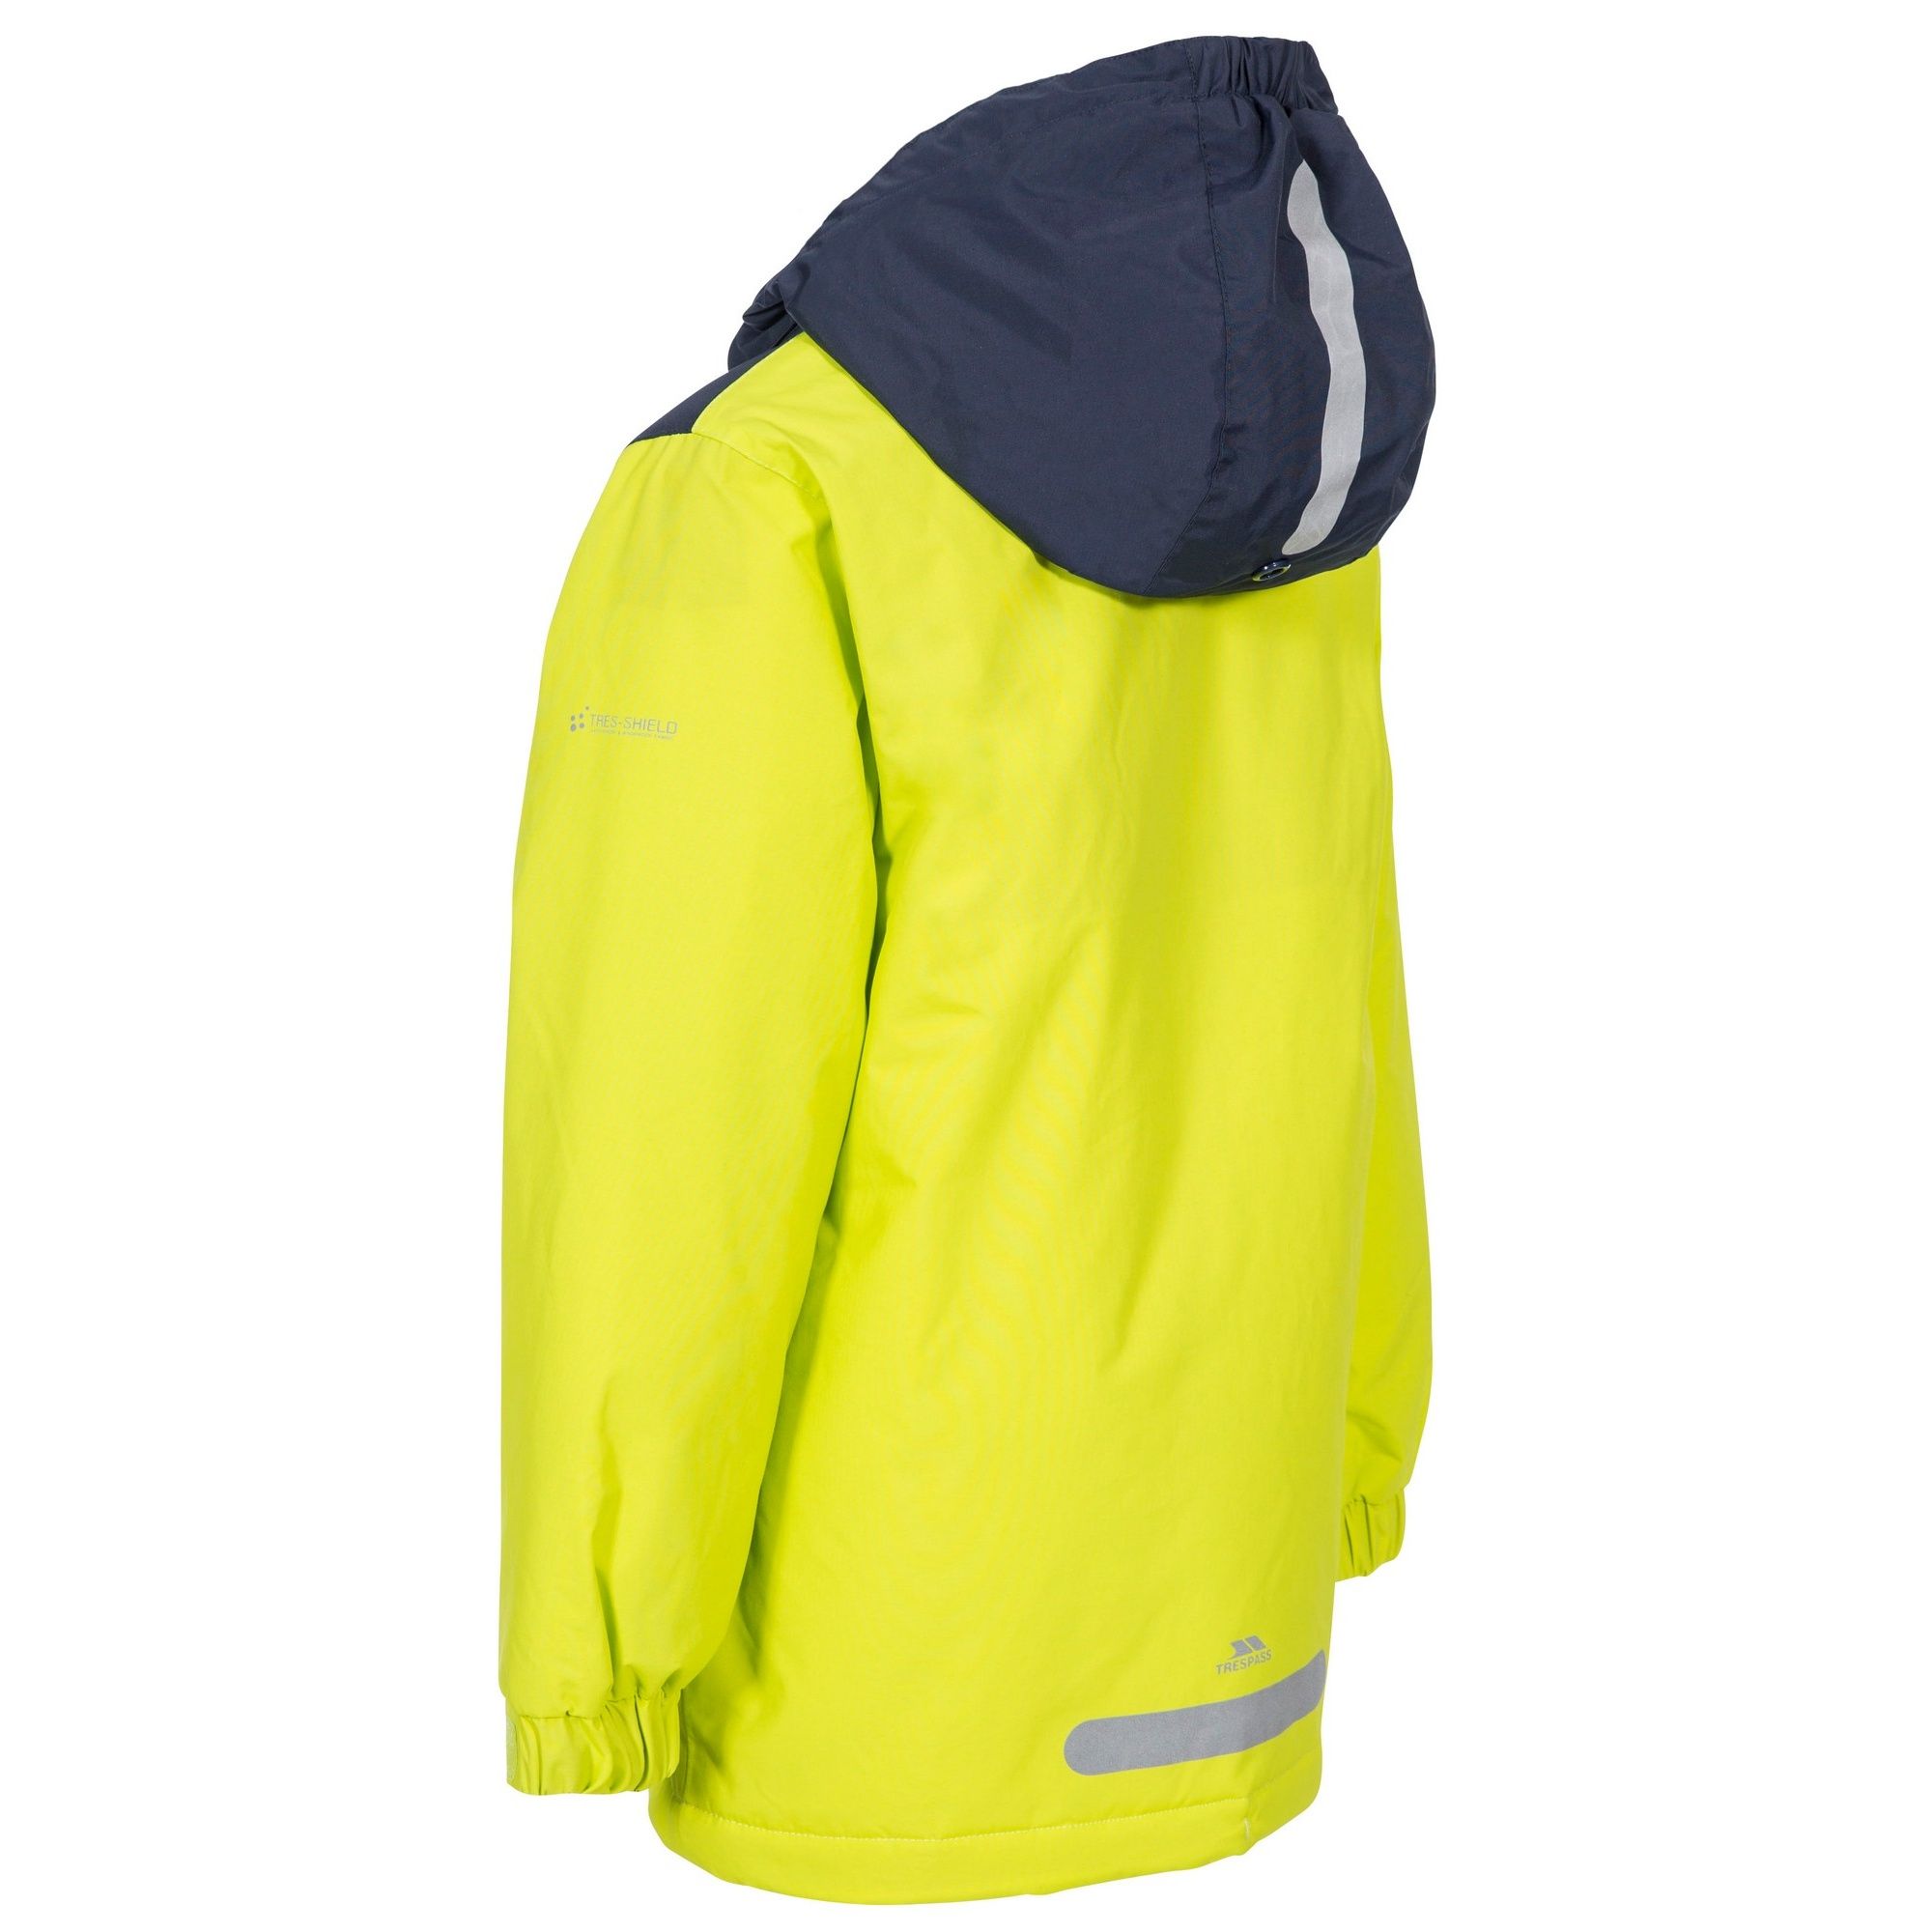 Padded. 2 colour jacket. 2 zip pockets. Adjustable cuff with touch fastening tab. Detachable hood. Reflective print on the hood and back hem. Waterproof 3000mm, taped seams, windproof. Shell: 100% Polyamide PU, Lining: 100% Polyester, Filling: 100% Polyester. Trespass Childrens Chest Sizing (approx): 2/3 Years - 21in/53cm, 3/4 Years - 22in/56cm, 5/6 Years - 24in/61cm, 7/8 Years - 26in/66cm, 9/10 Years - 28in/71cm, 11/12 Years - 31in/79cm.